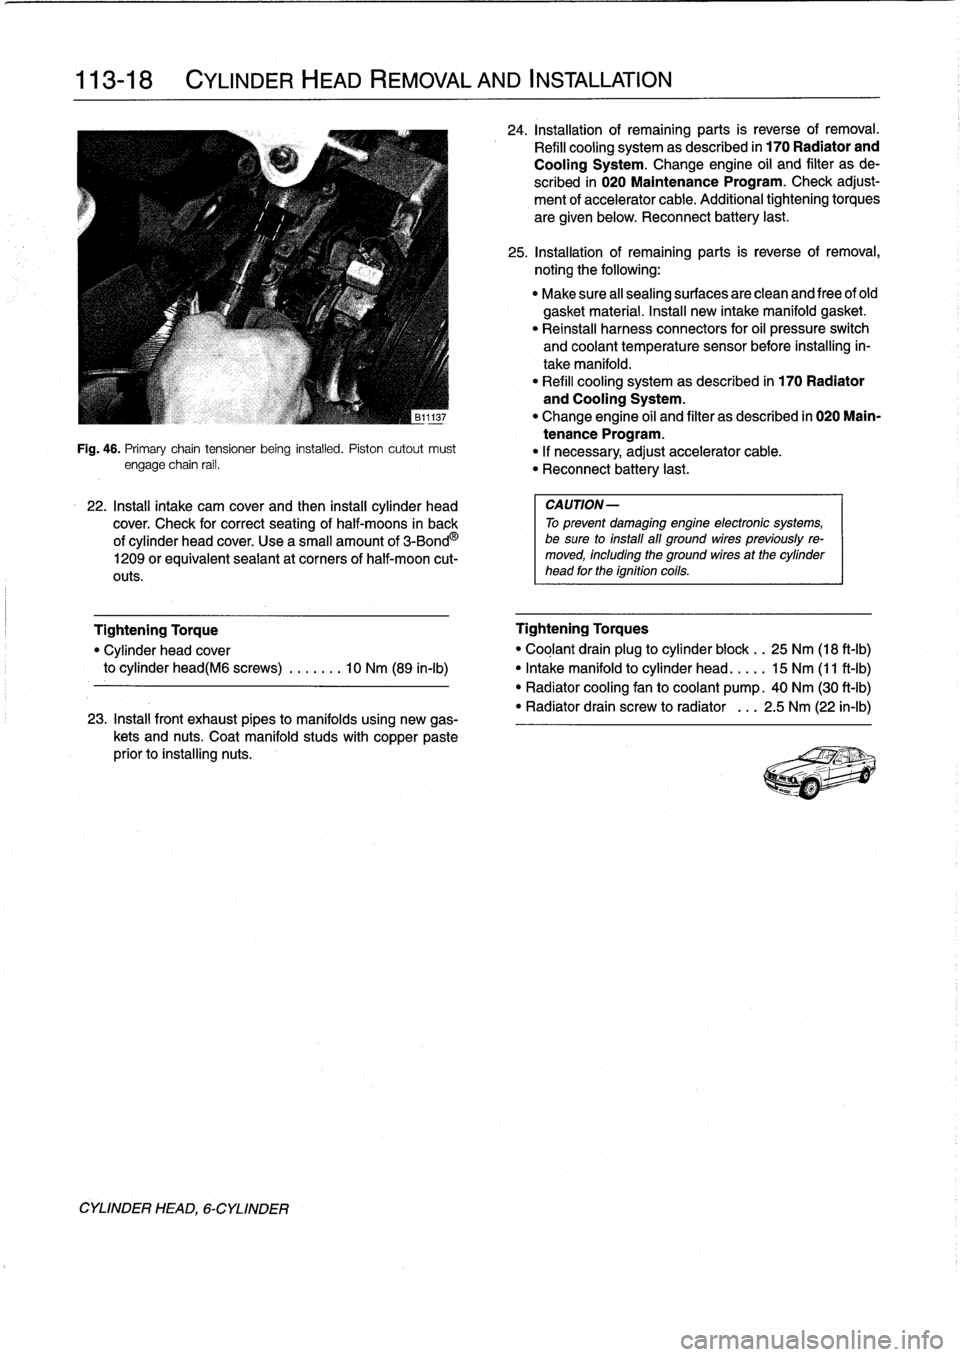 BMW 328i 1994 E36 Owners Manual 
113-
1
8

	

CYLINDER
HEAD
REMOVAL
AND
INSTALLATION

CYLINDER
HEAD,
6-CYLINDER

Fig
.
46
.
Primary
chaintensioner
being
installed
.
Piston
cutout
must
engage
chain
rail
.

22
.
Install
intake
cam
cov